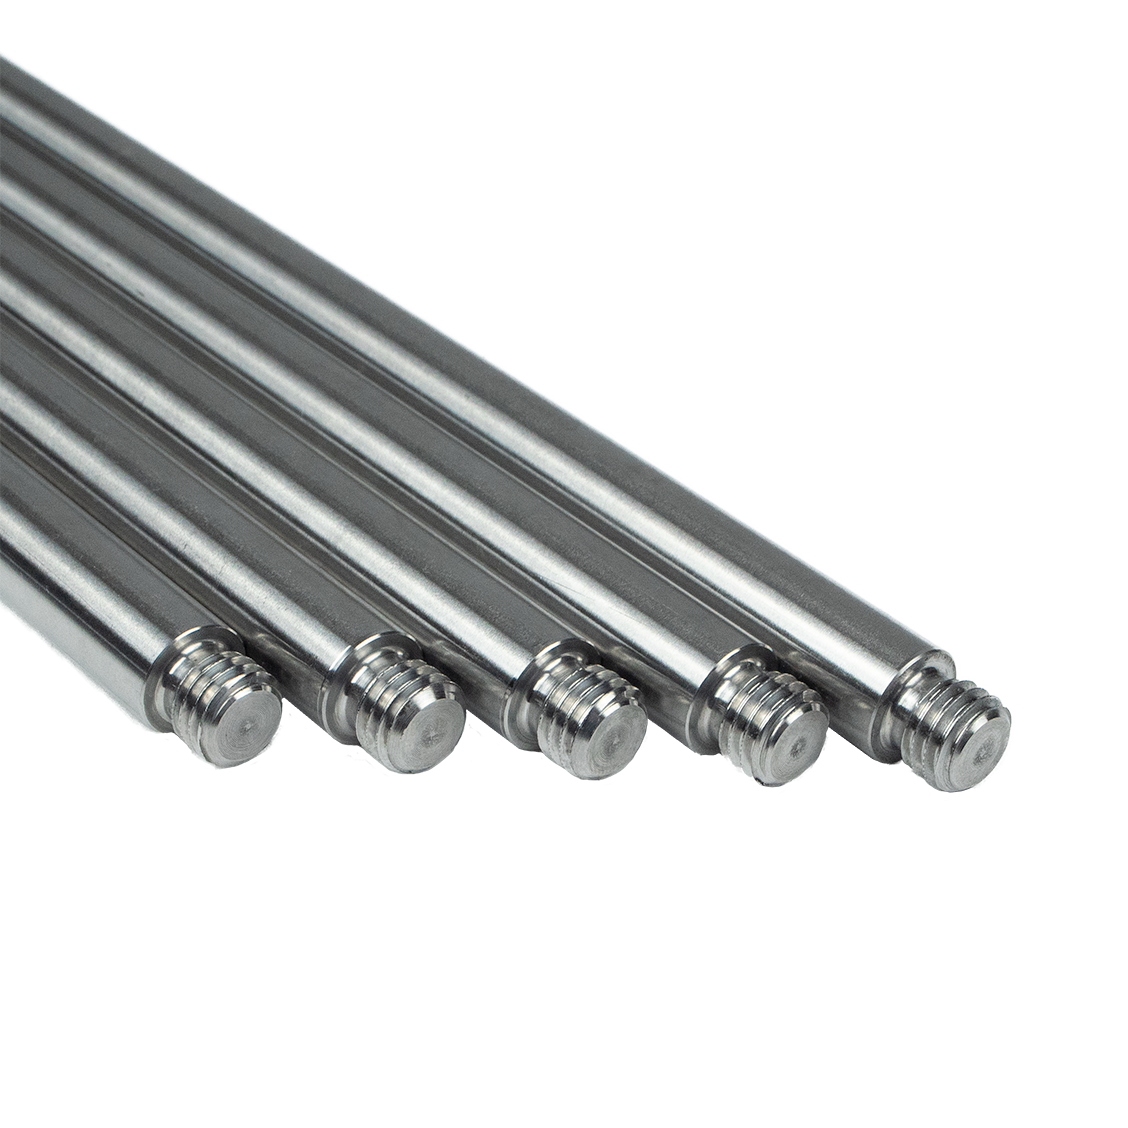 Threaded Stand Rod M10 - Ø 15 mm, length 1500 mm - stainless steel